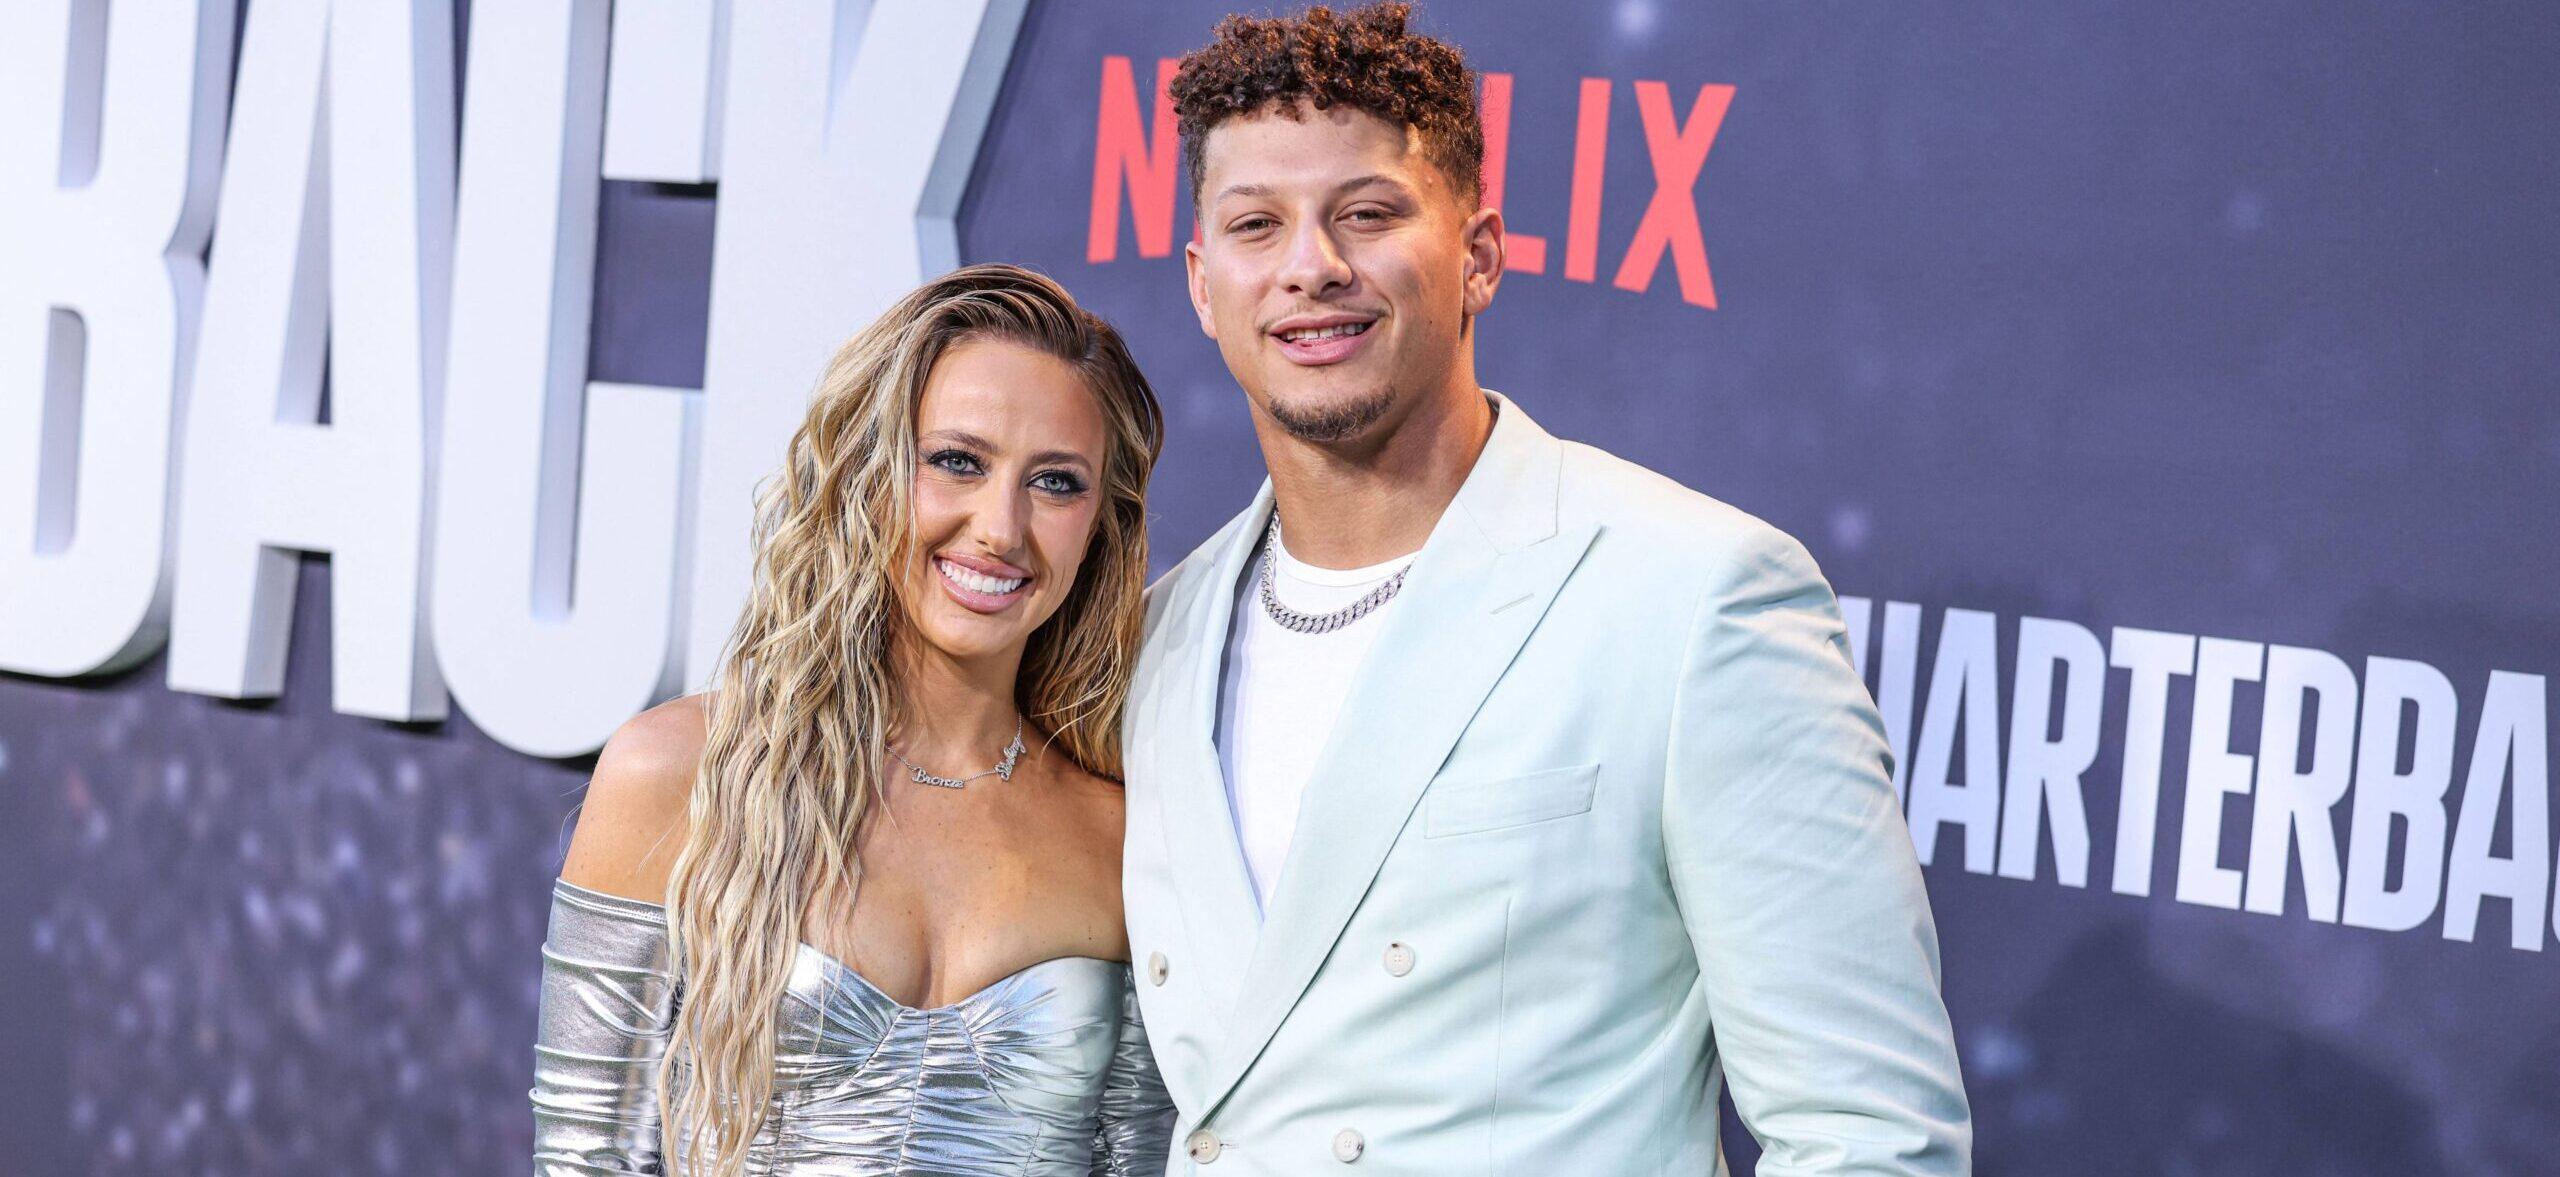 Brittany Mahomes Flaunts Incredible Postpartum Body With Patrick